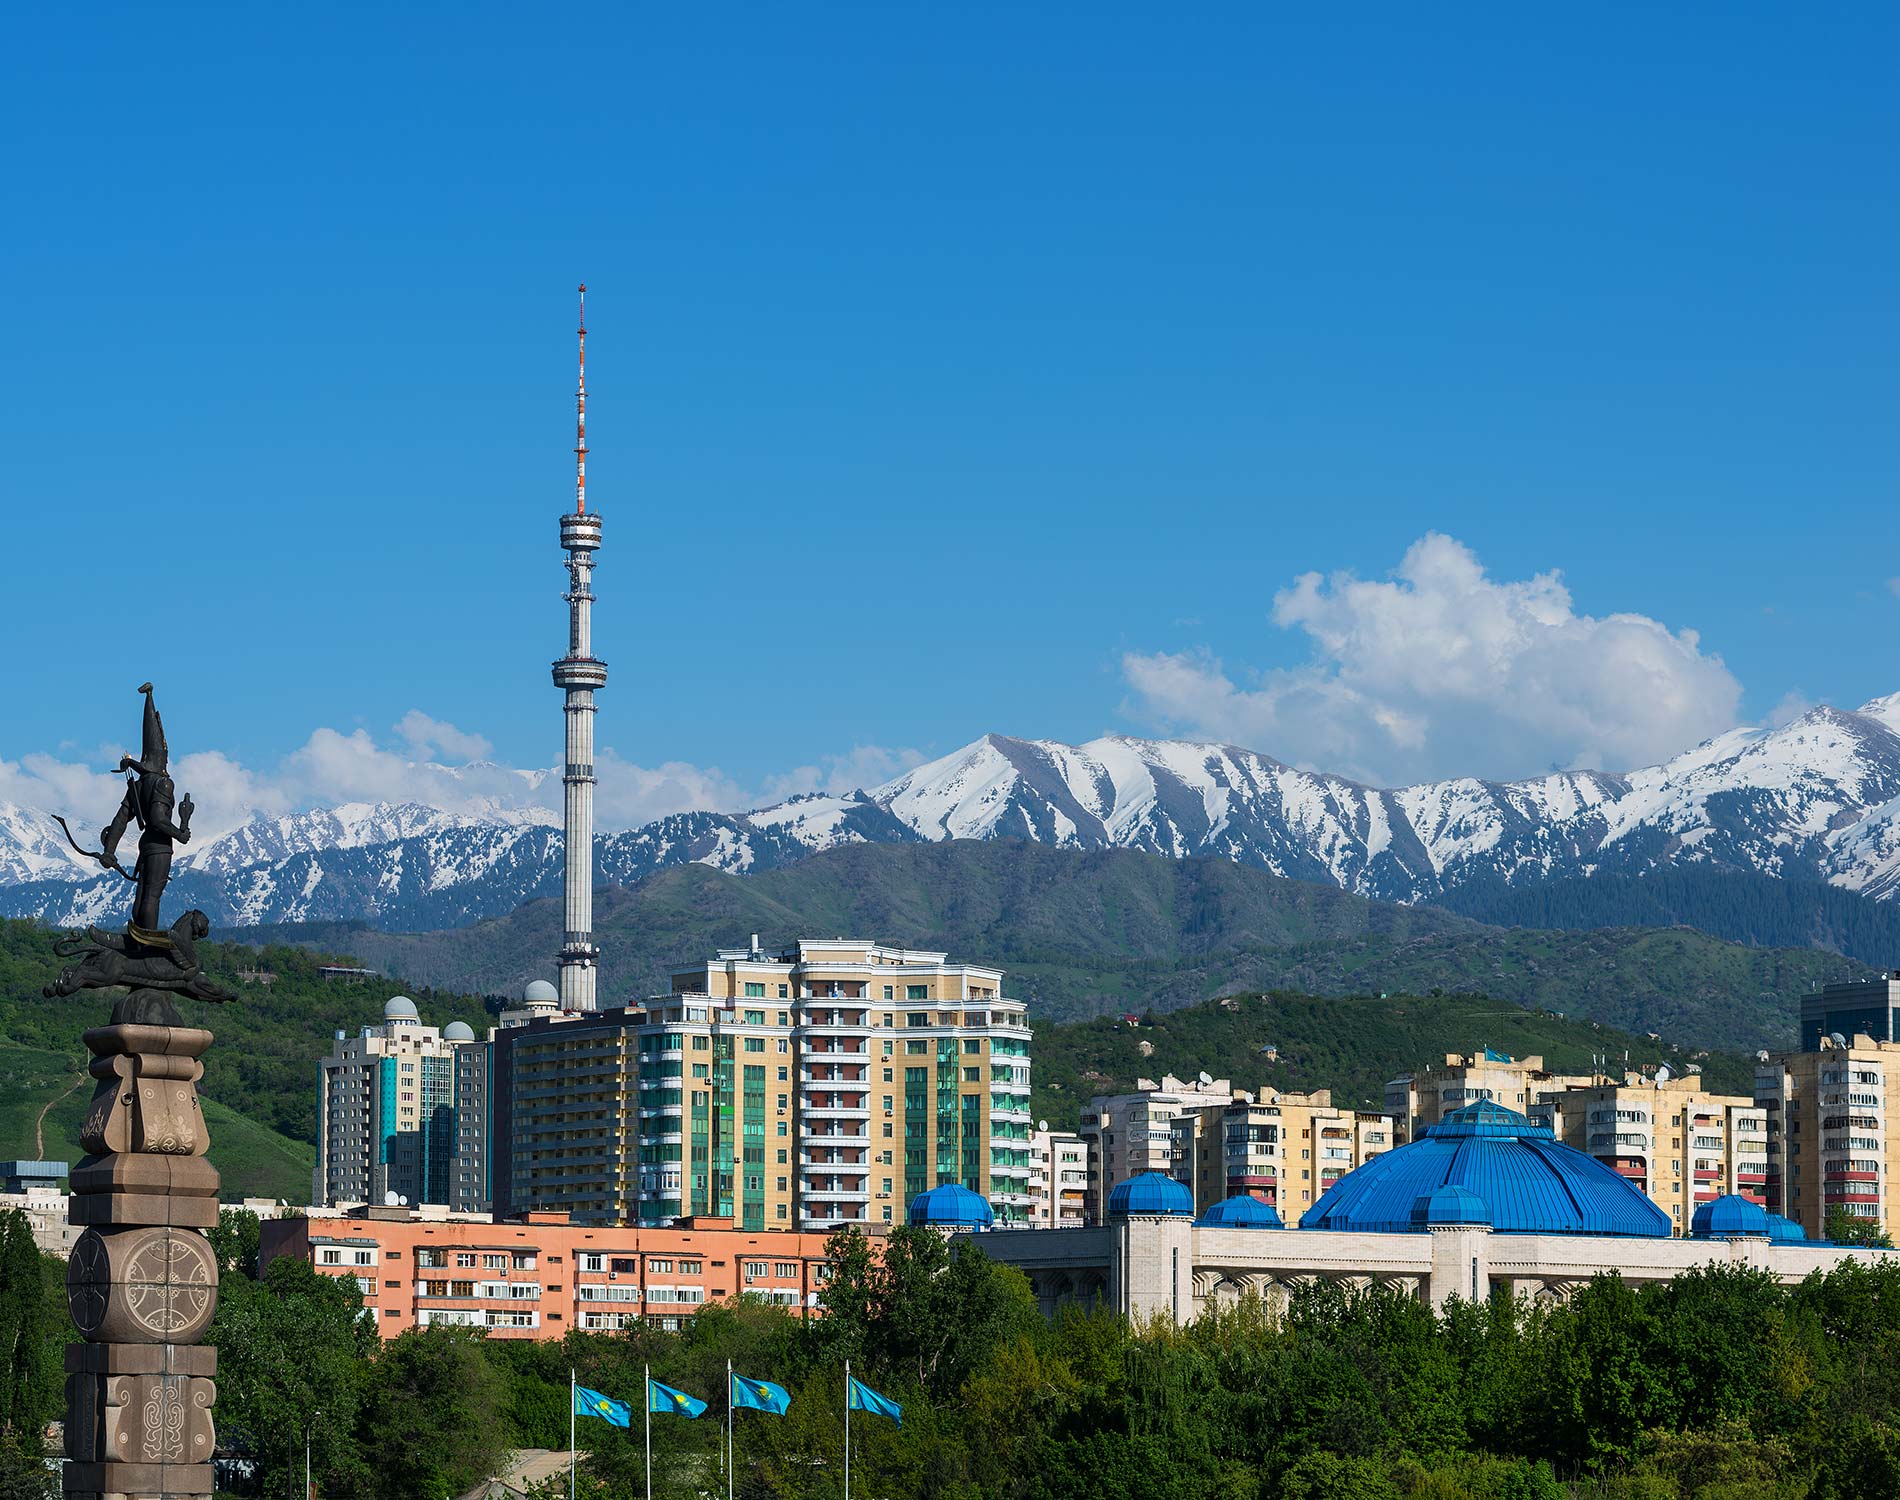 /-/media/images/website/background-images/offices/almaty/almaty_web.ashx